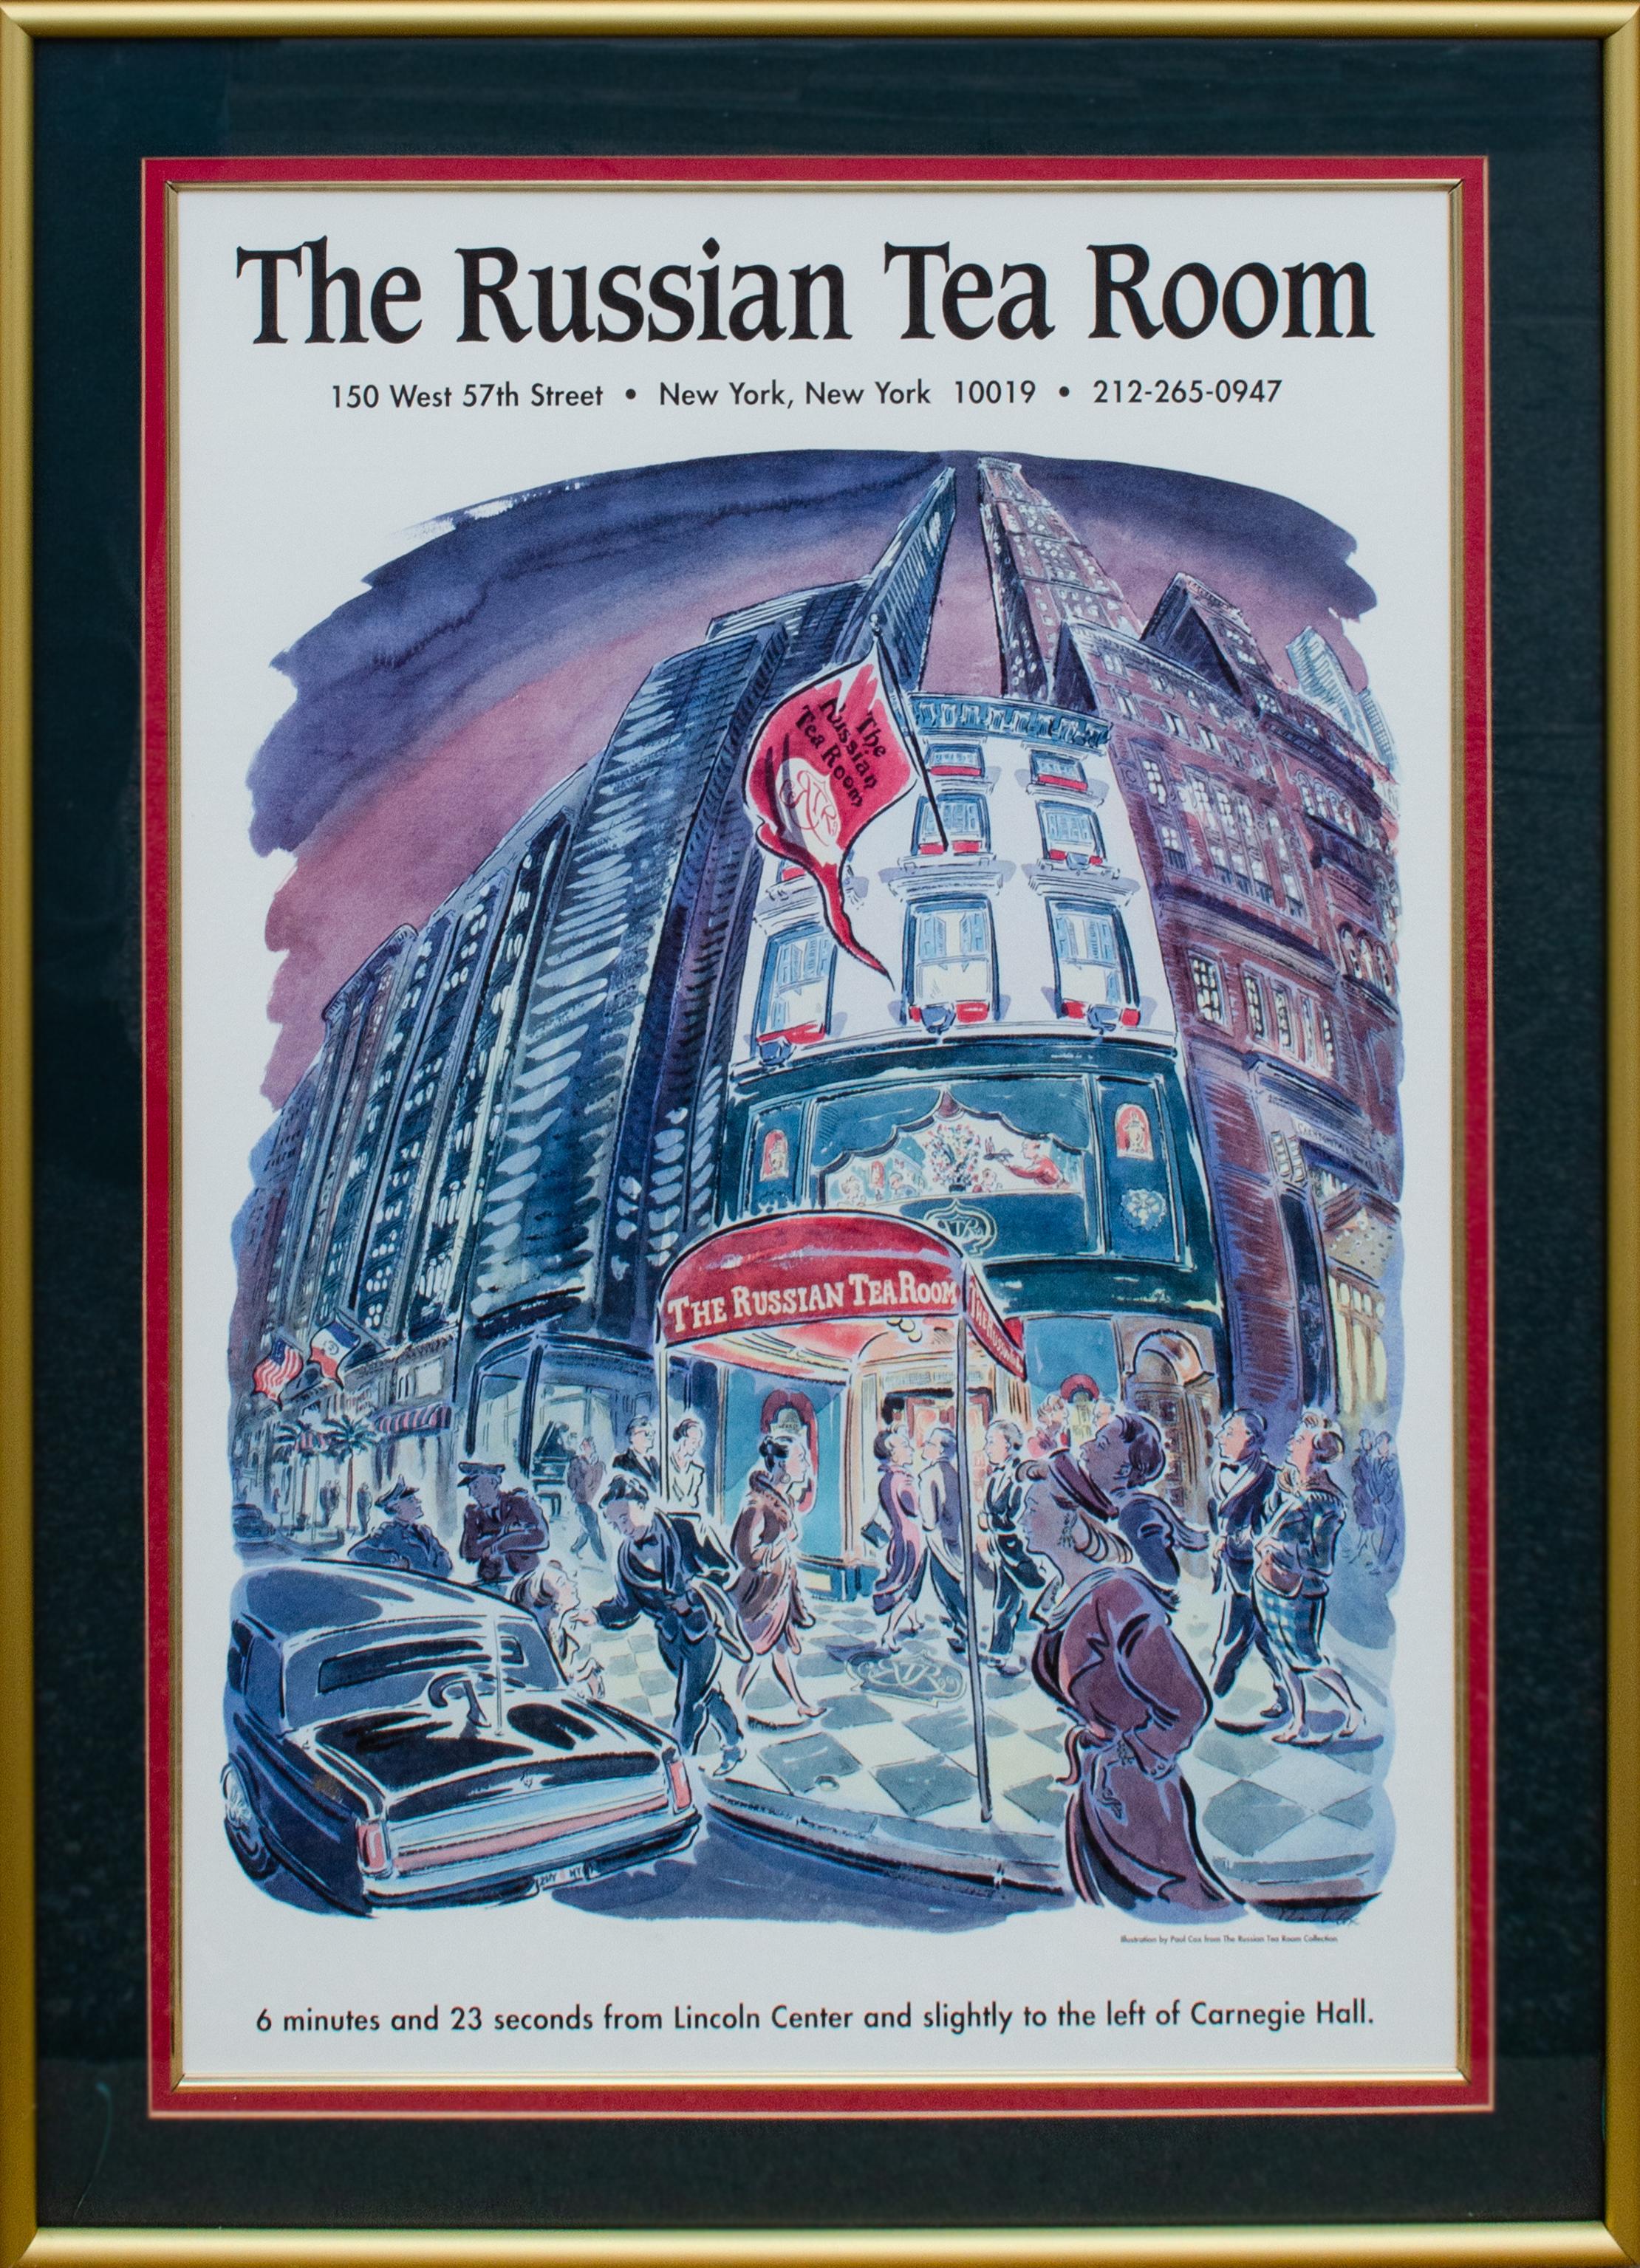 Paul Cox (American, b. 1957)
Russian Tea Room Poster, c. 1990
Screen print (?)
Sight: 28 x 19 1/2 in.
Framed: 34 x 25 1/4 x 1 1/2 in.
Signed in the plate bottom right

Paul is a freelance illustrator and painter who has worked on various projects